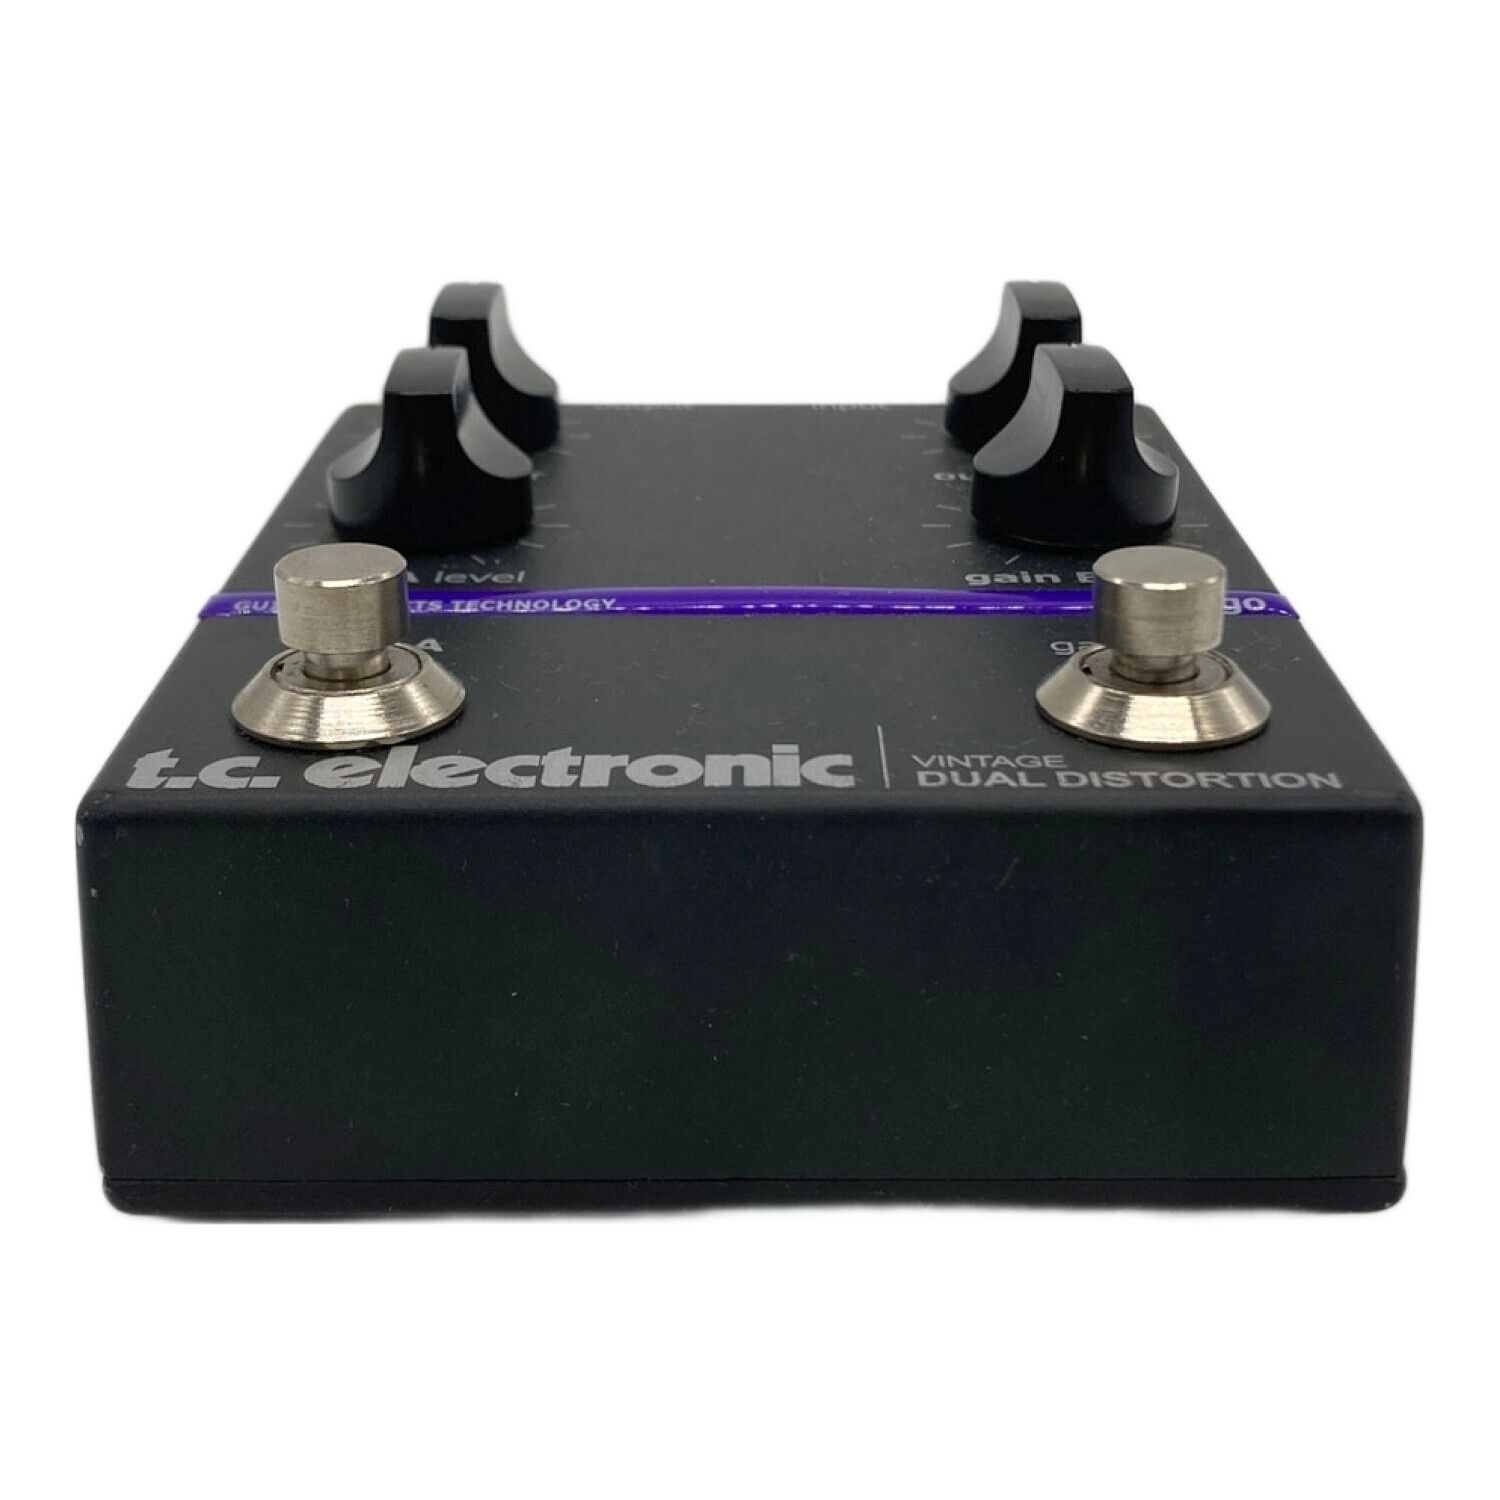 t.c.electronic(TＣエレクトロニック) Vintage Dual Distortion Pedal｜トレファクONLINE